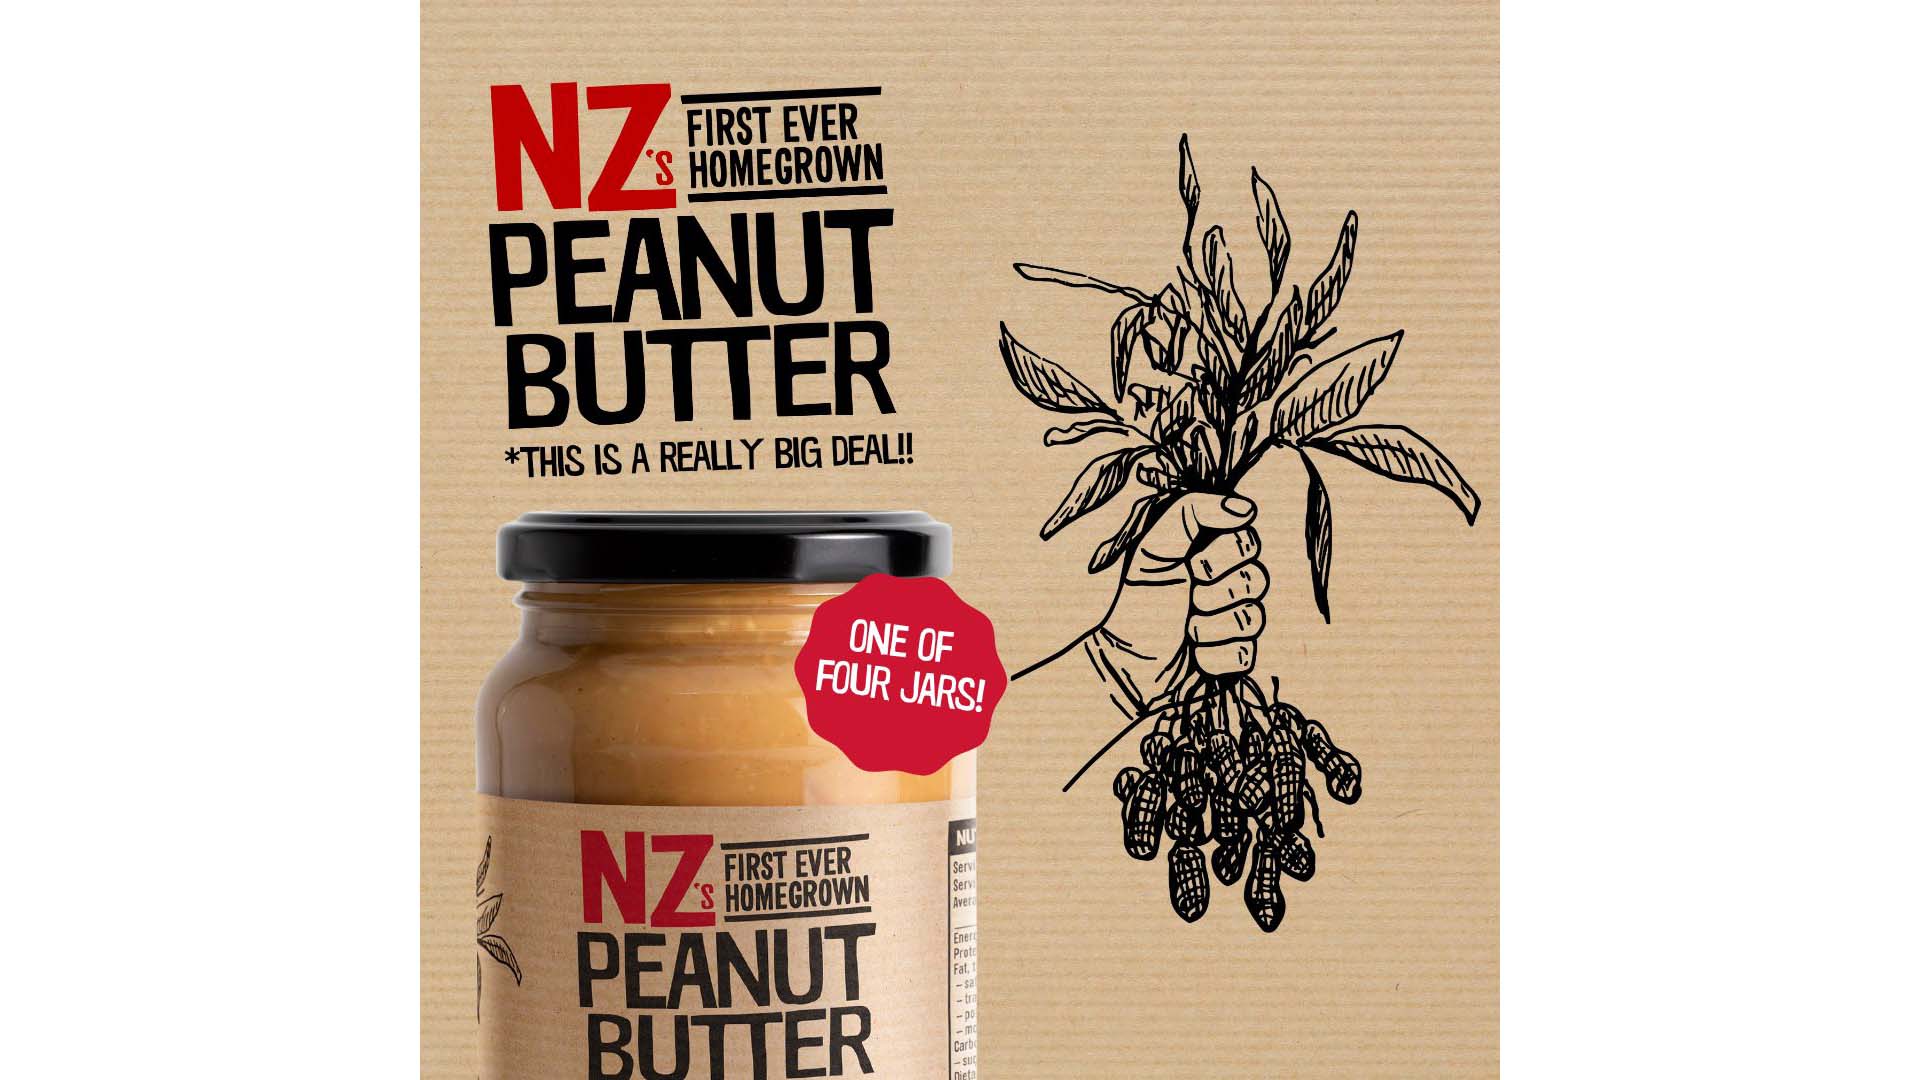 A jar of New Zealand's first-ever homegrown peanut butter, auctioned on Trade Me, finds its first home.